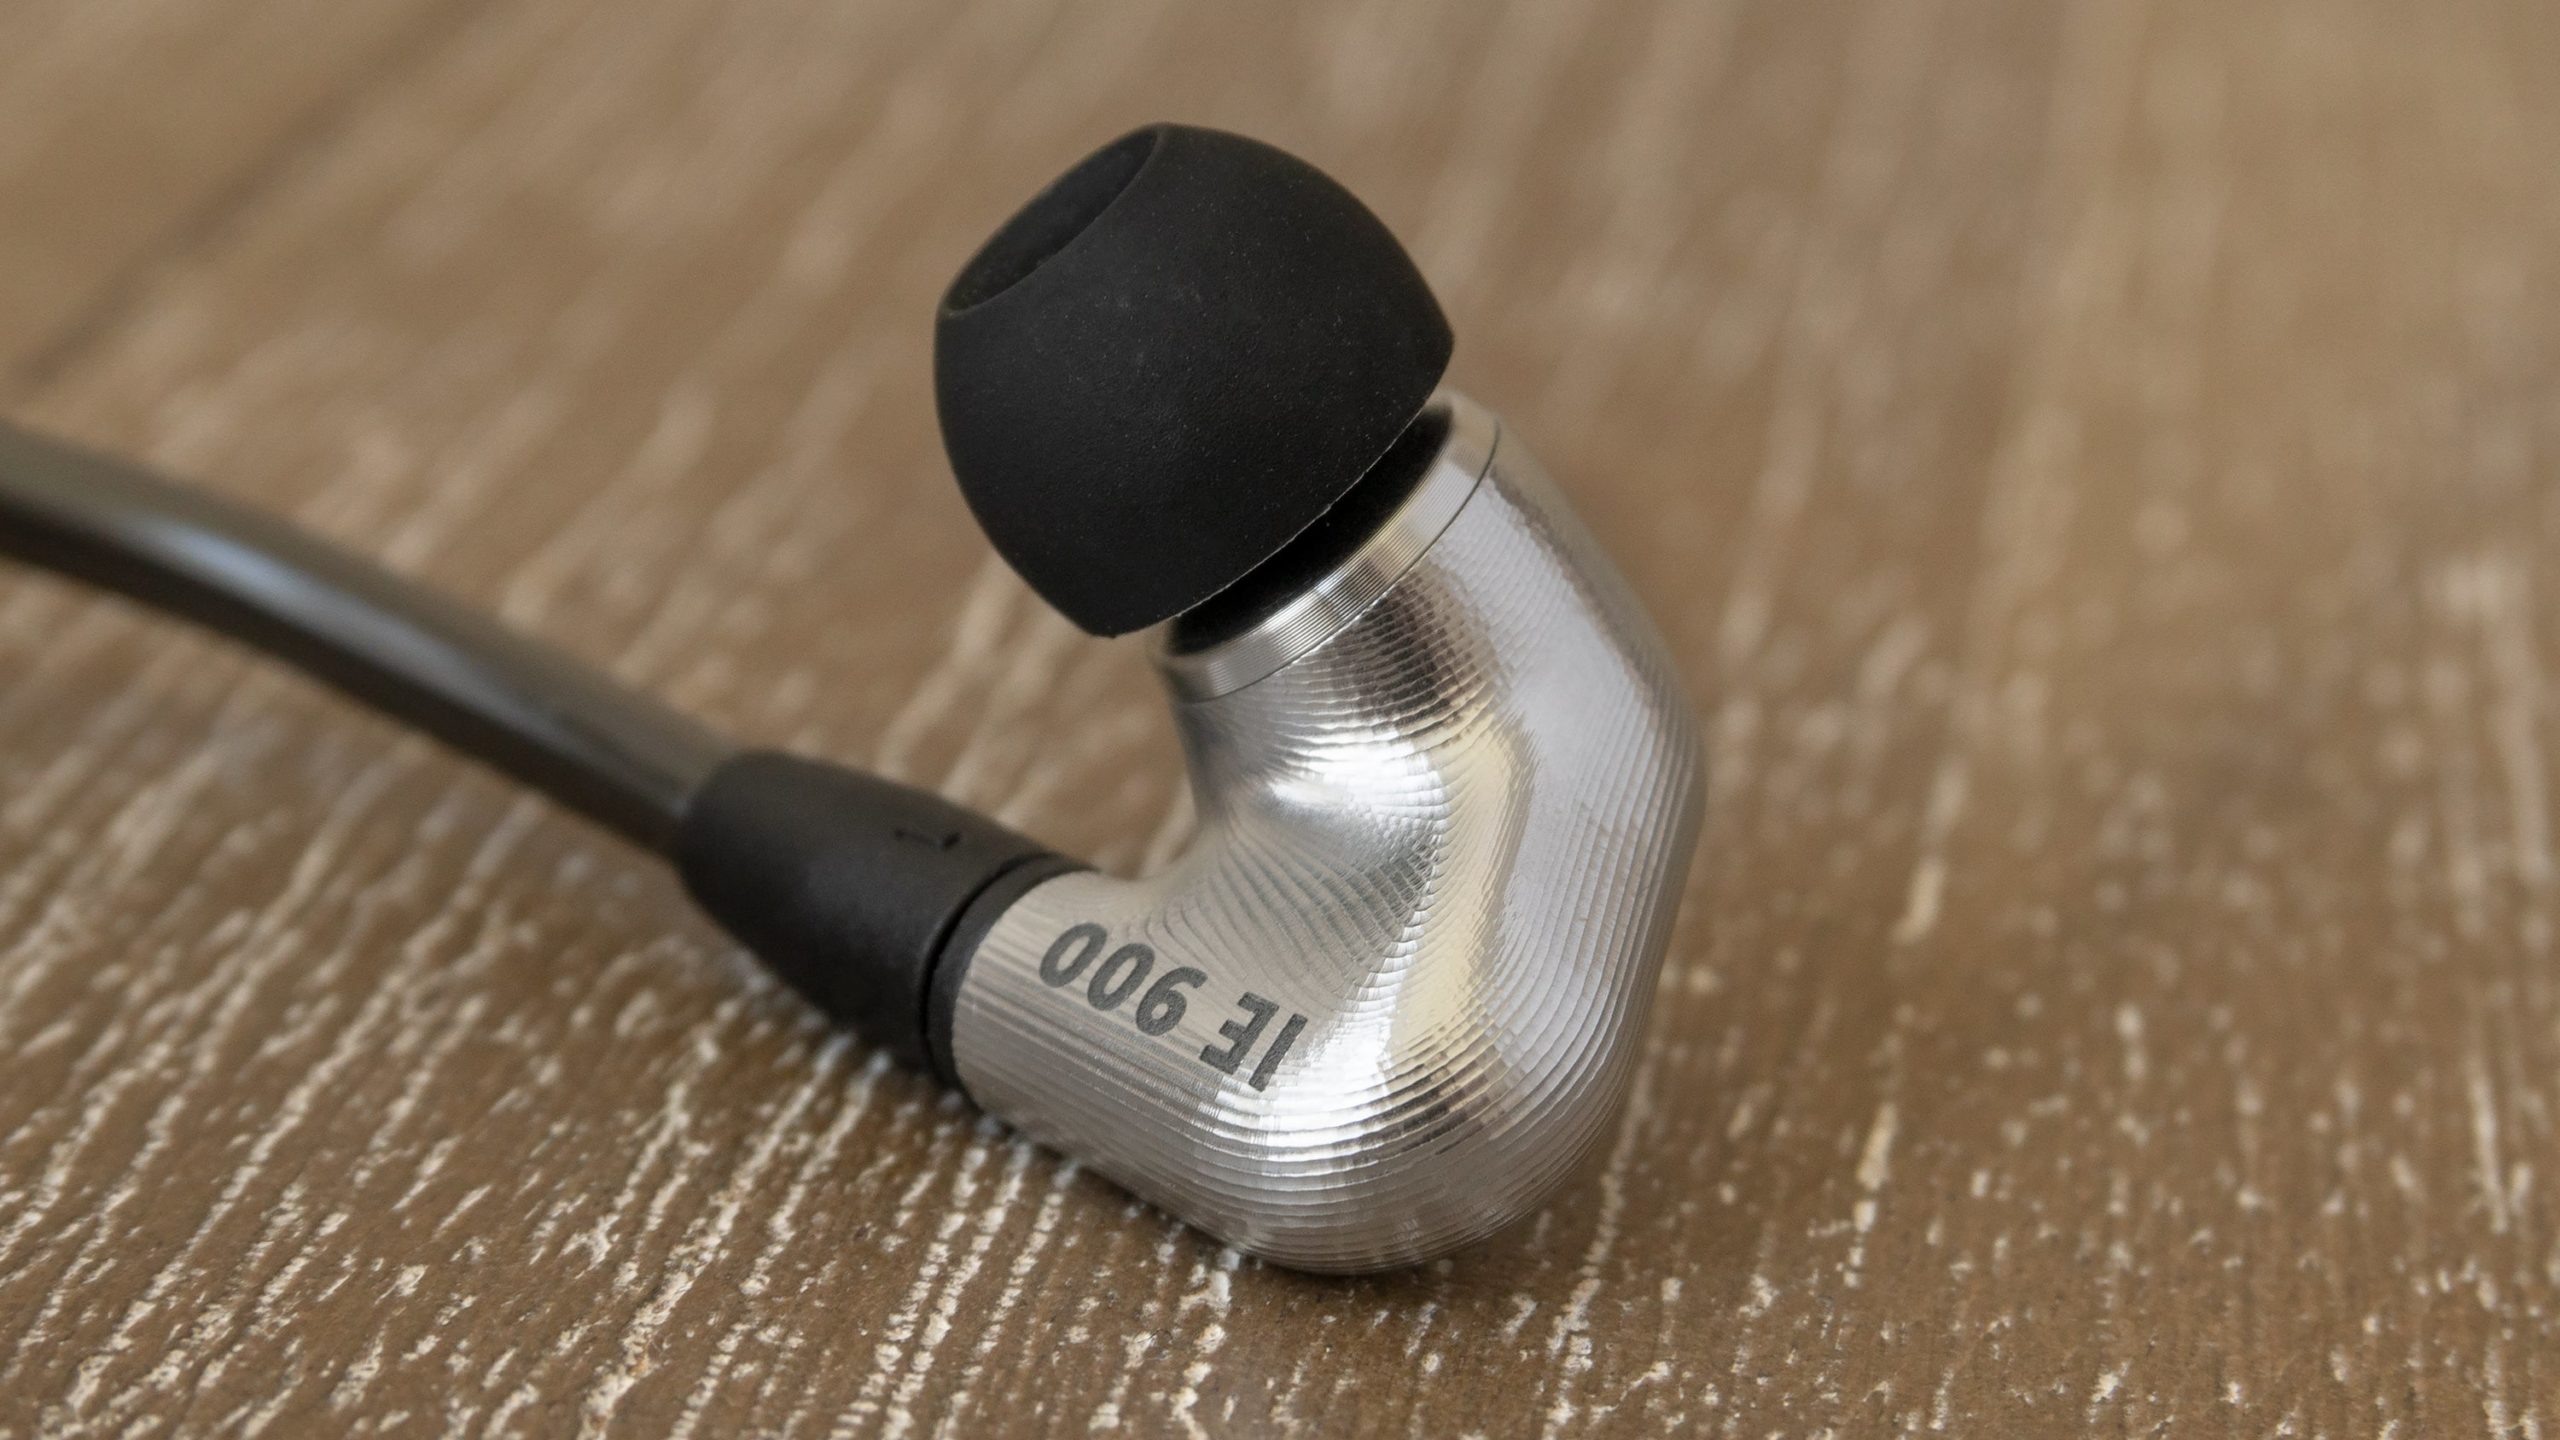 Each IE 900 earbud is milled from a single block of aluminium, inside and out, with the concentric milling marks making for a unique finish. (Photo: Andrew Liszewski/Gizmodo)